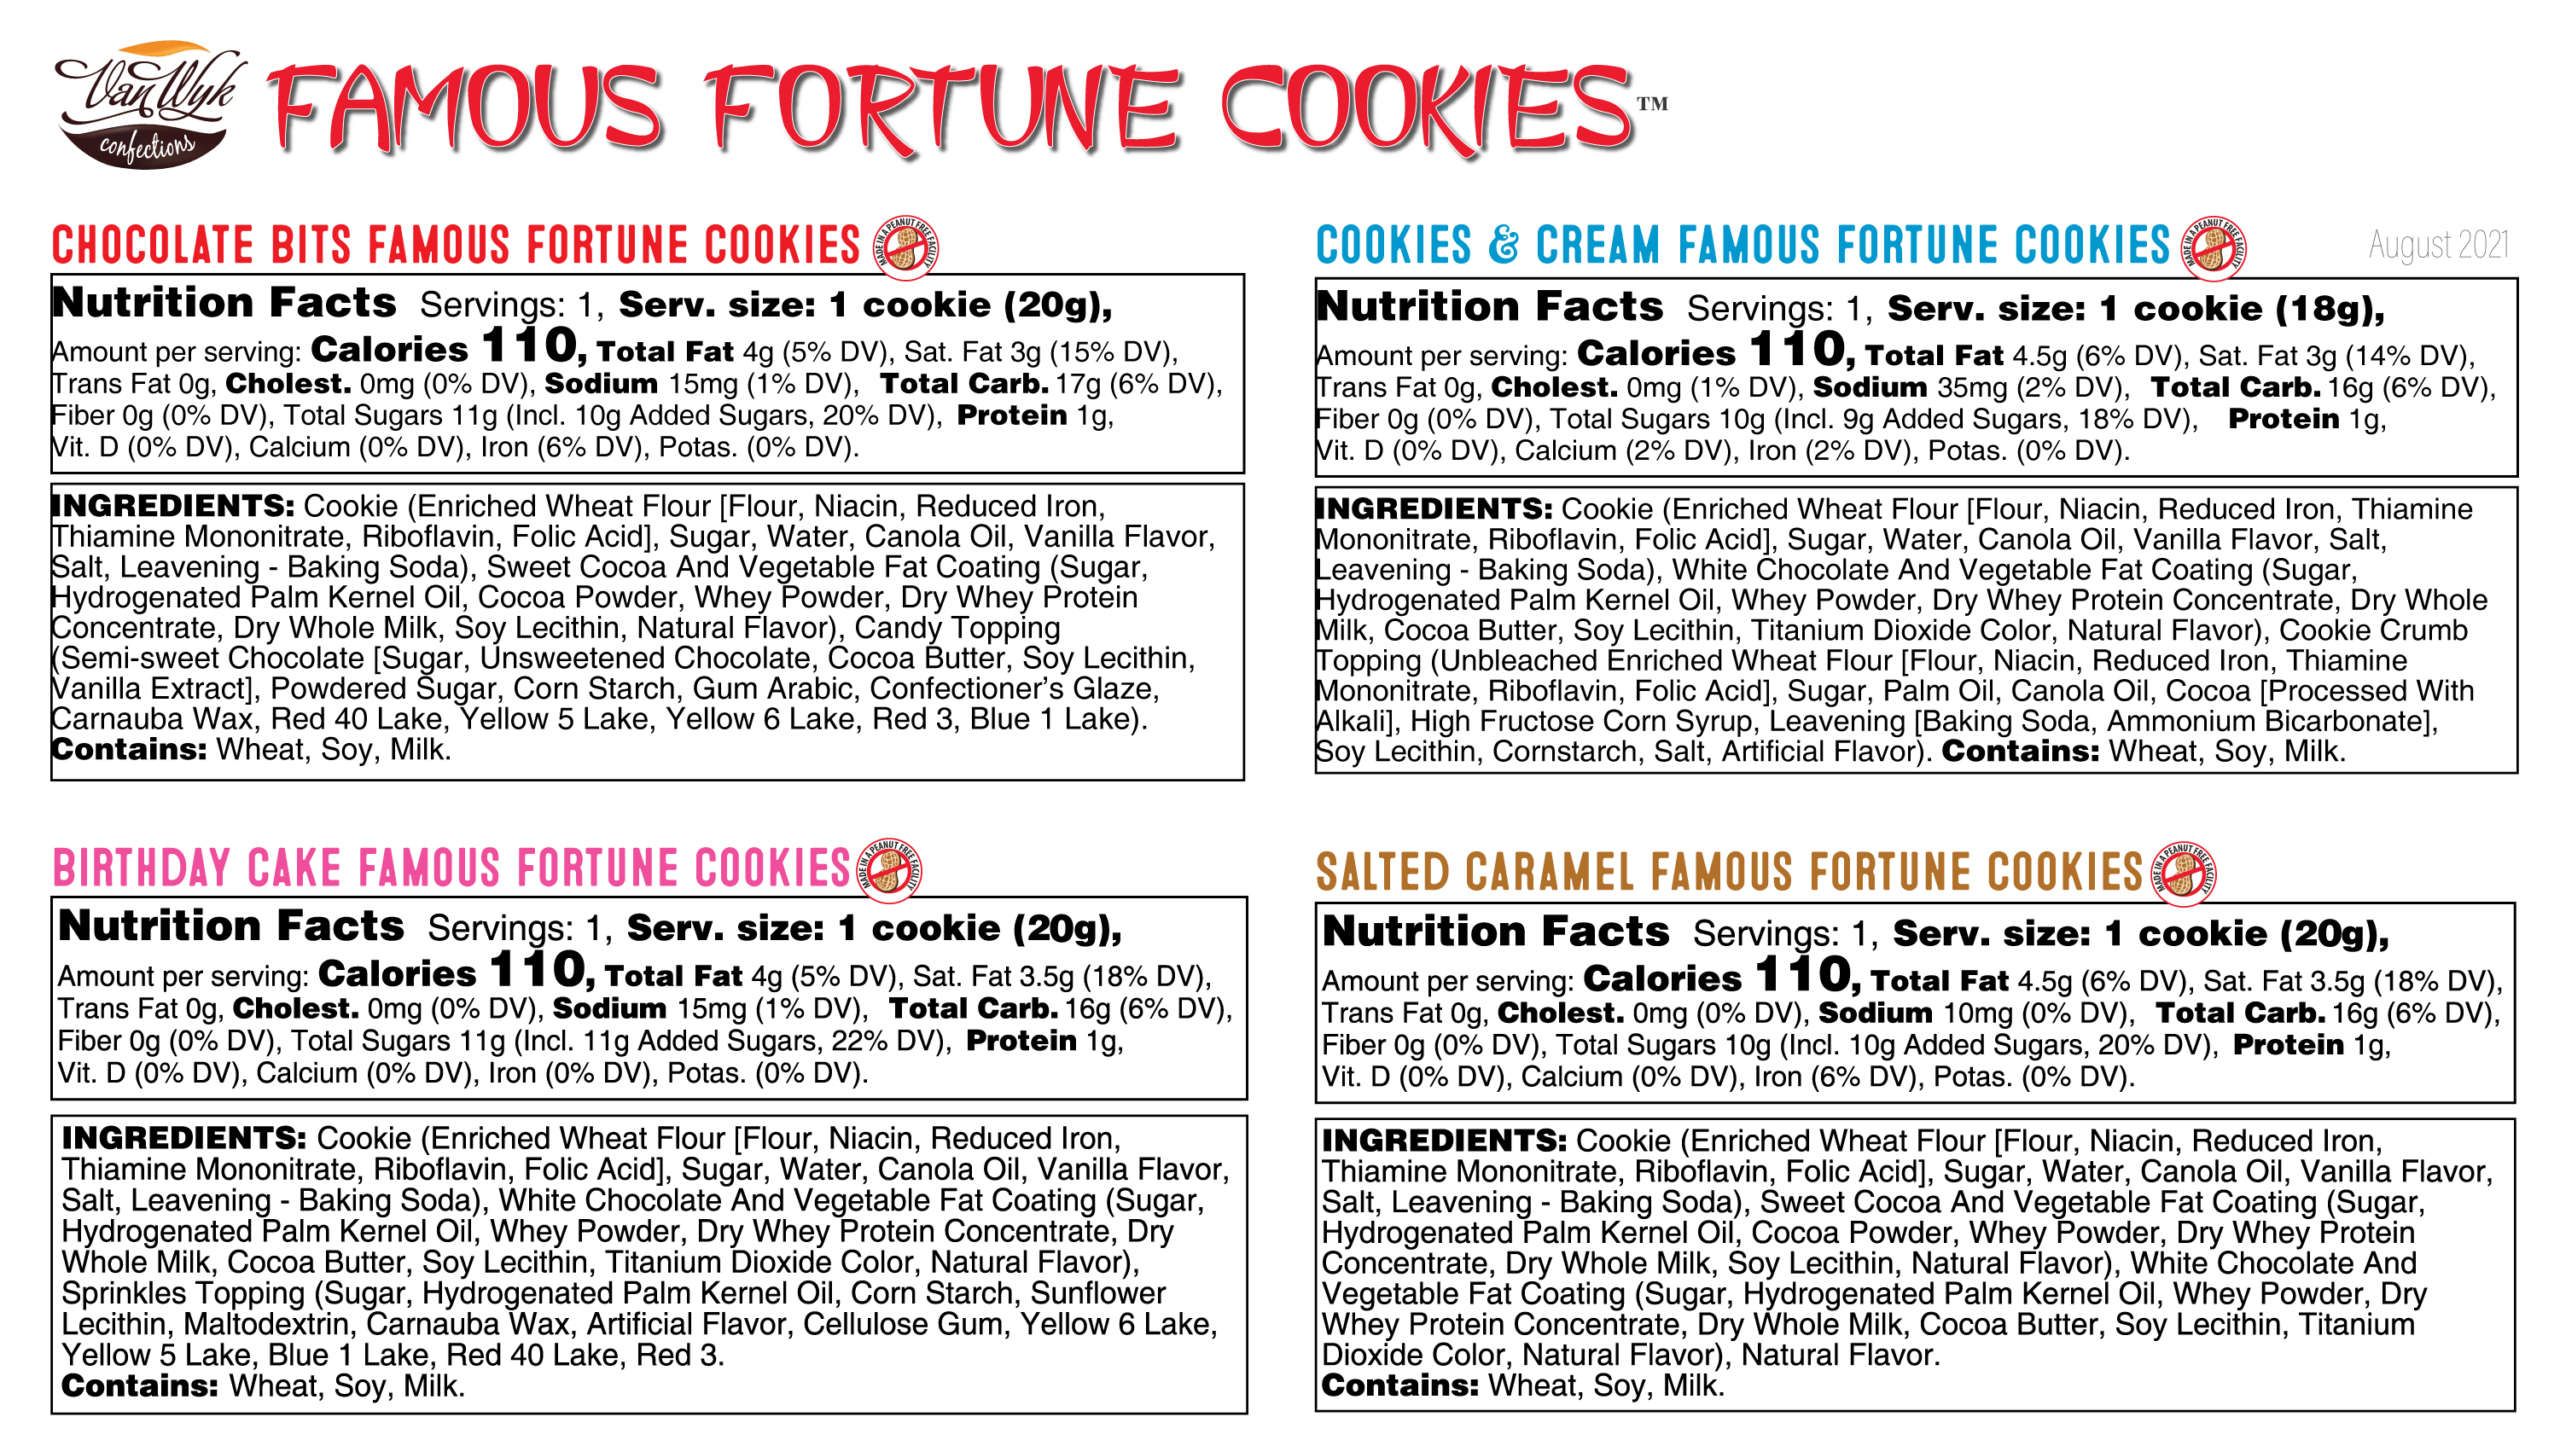 Famous Fortune Cookies Nutrition Facts and Ingredients